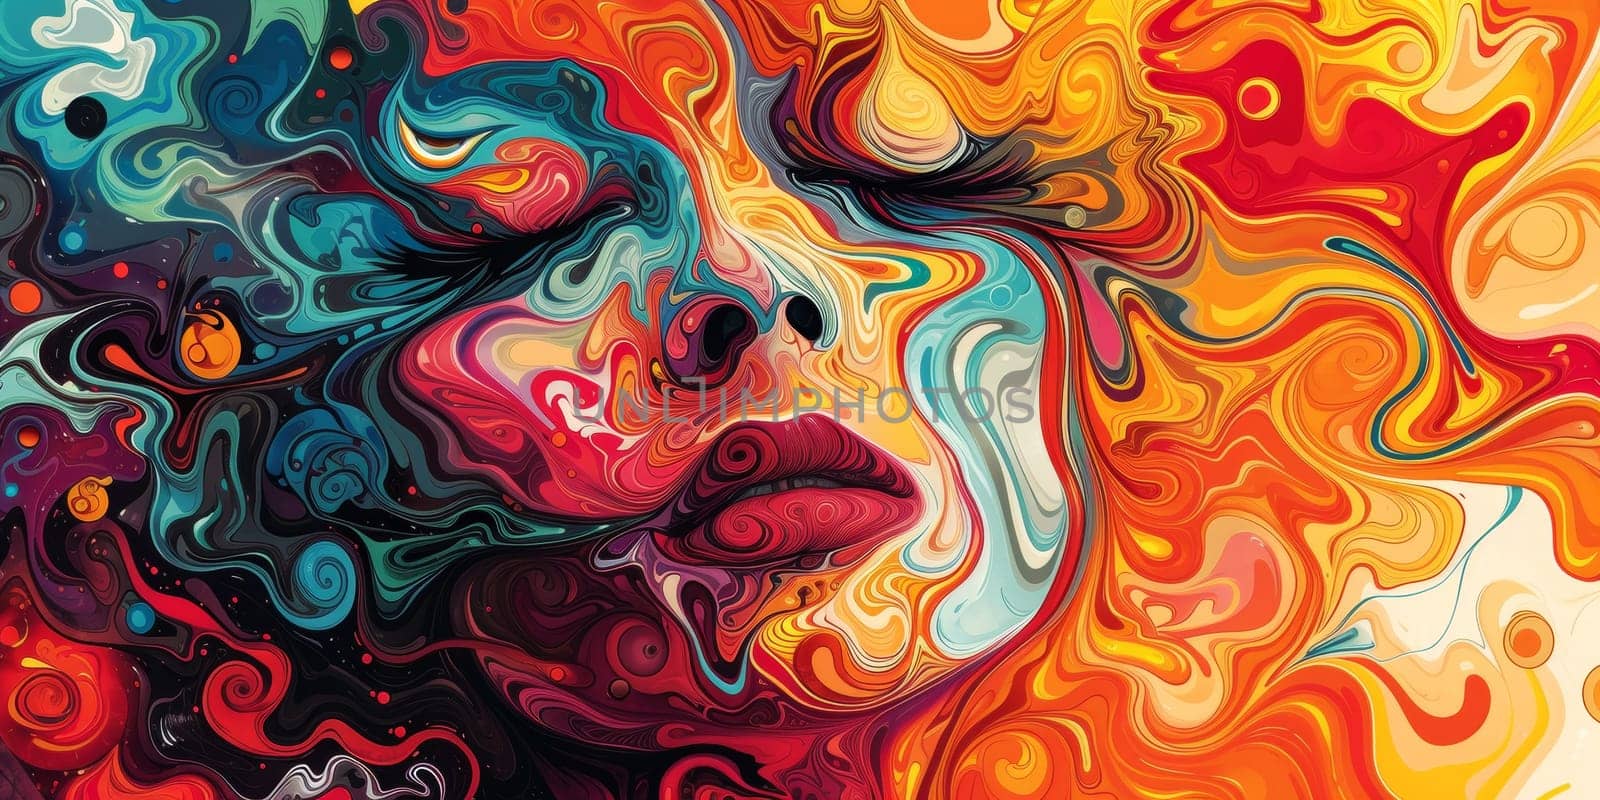 A colorful painting of a woman's face with swirls and colors, AI by starush